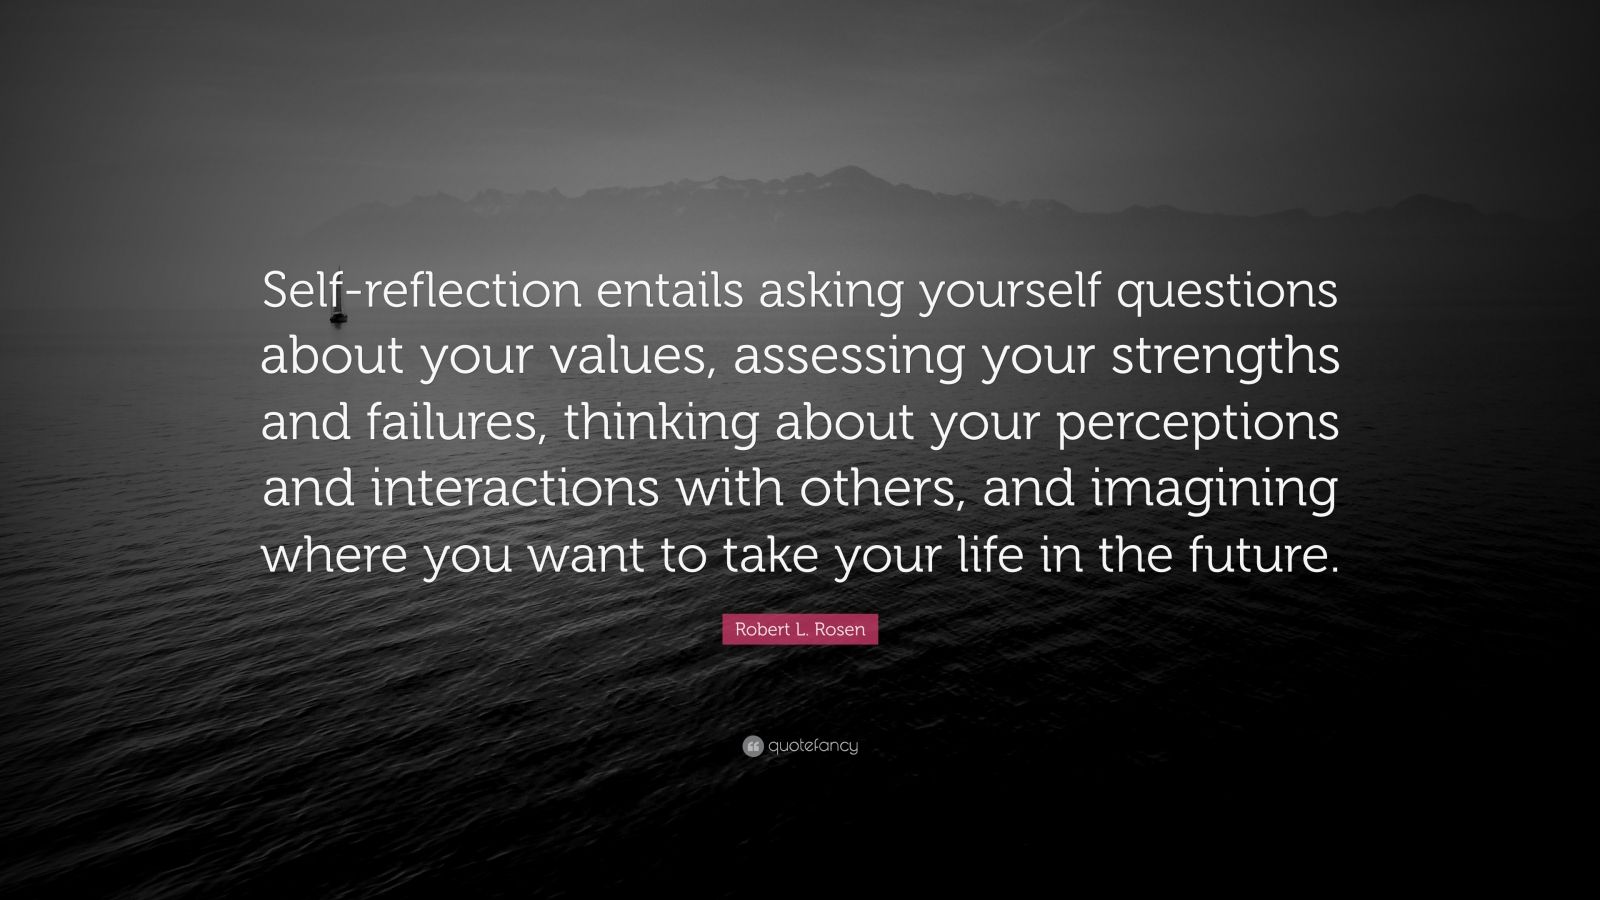 3207821 Robert L Rosen Quote Self reflection entails asking yourself